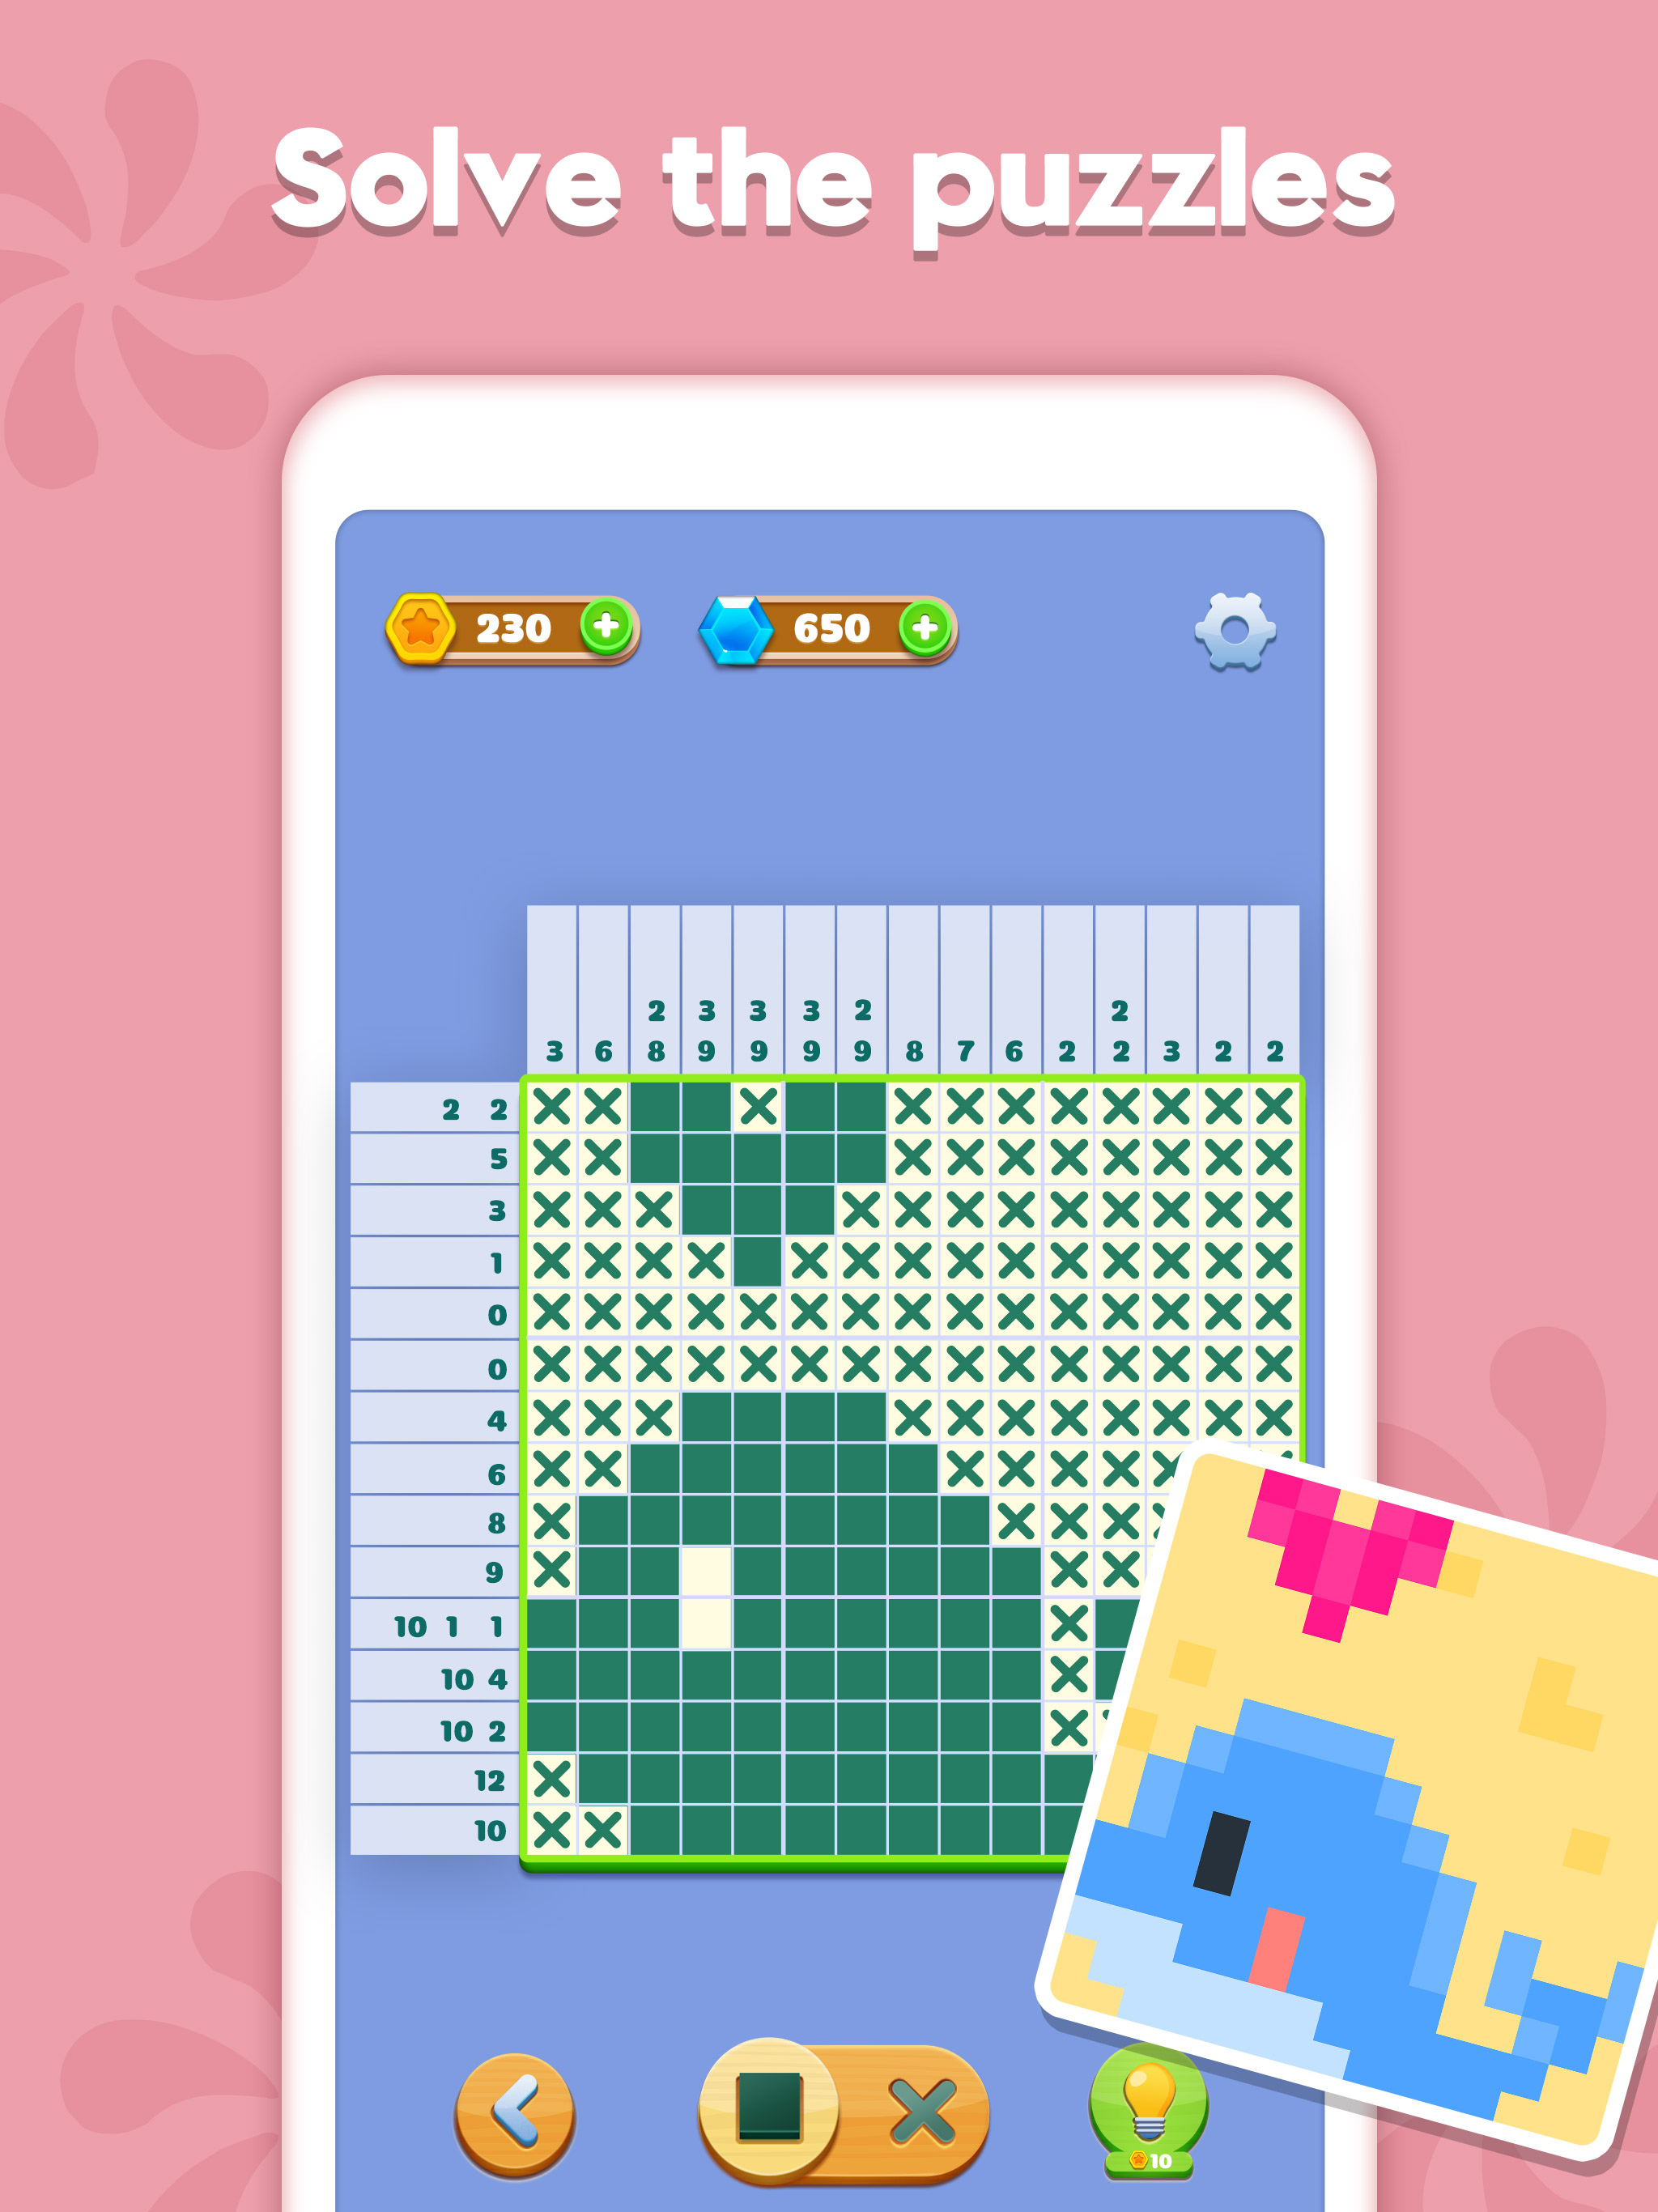 Play Nonogram - Jigsaw Puzzle Game Online